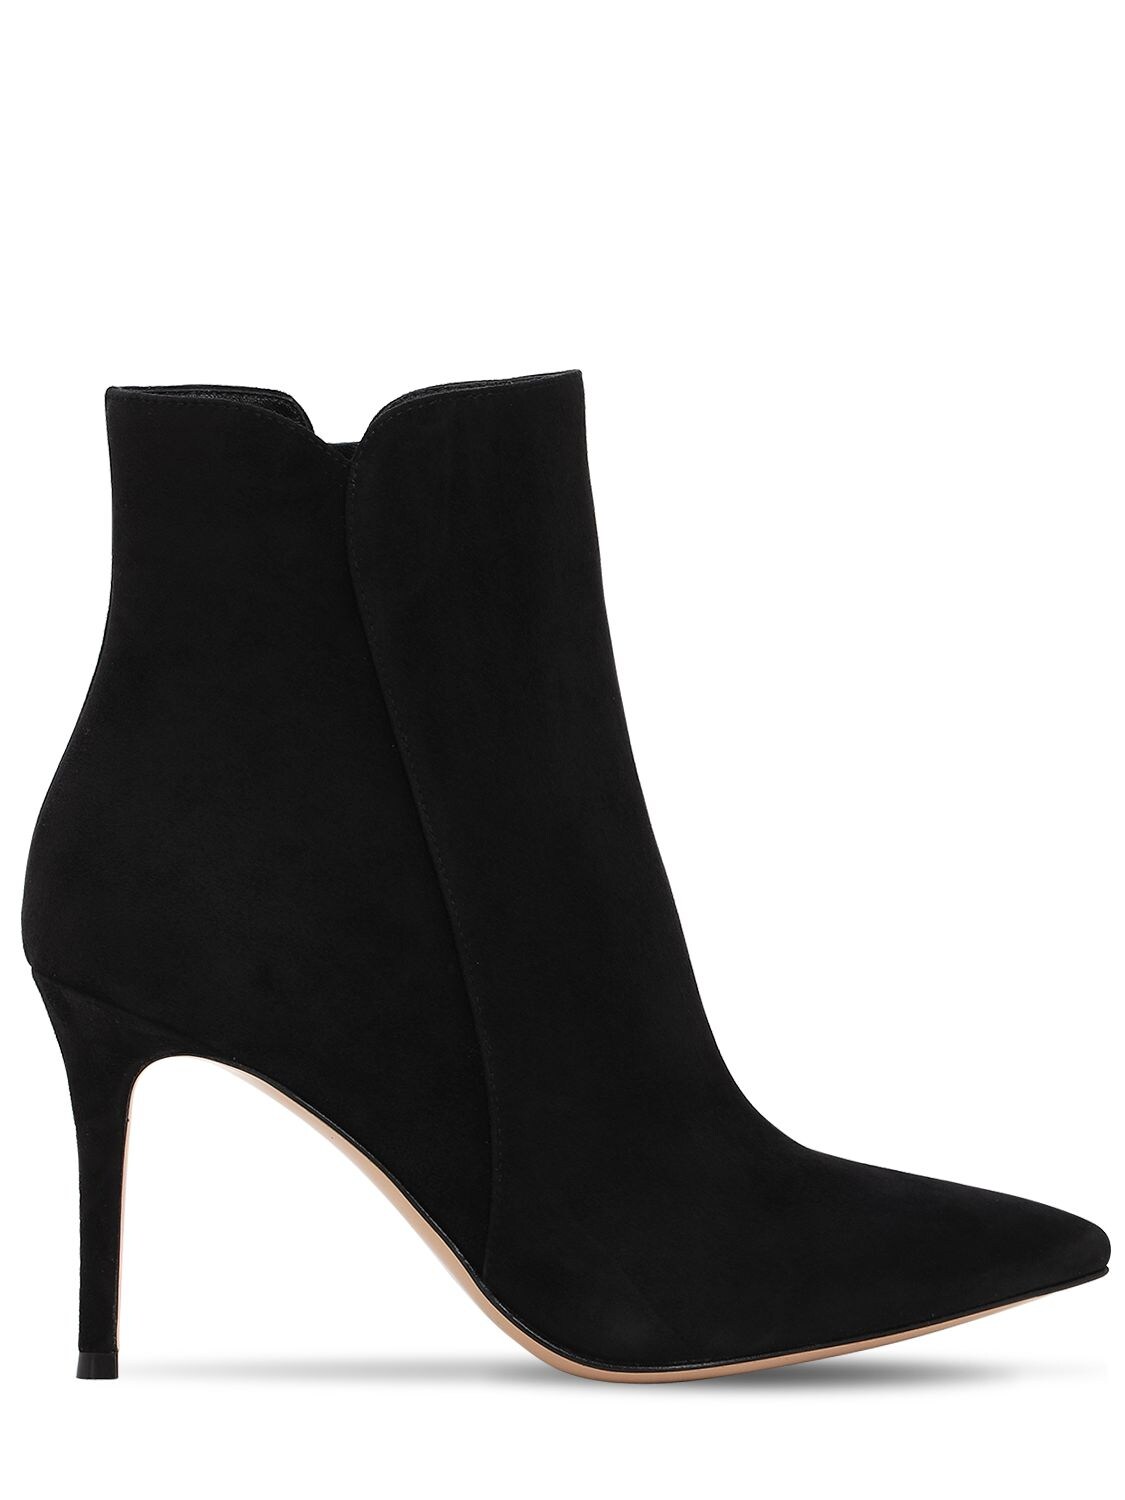 GIANVITO ROSSI 85MM LEVY SUEDE ANKLE BOOTS,70IAI4001-QKXBQ0S1